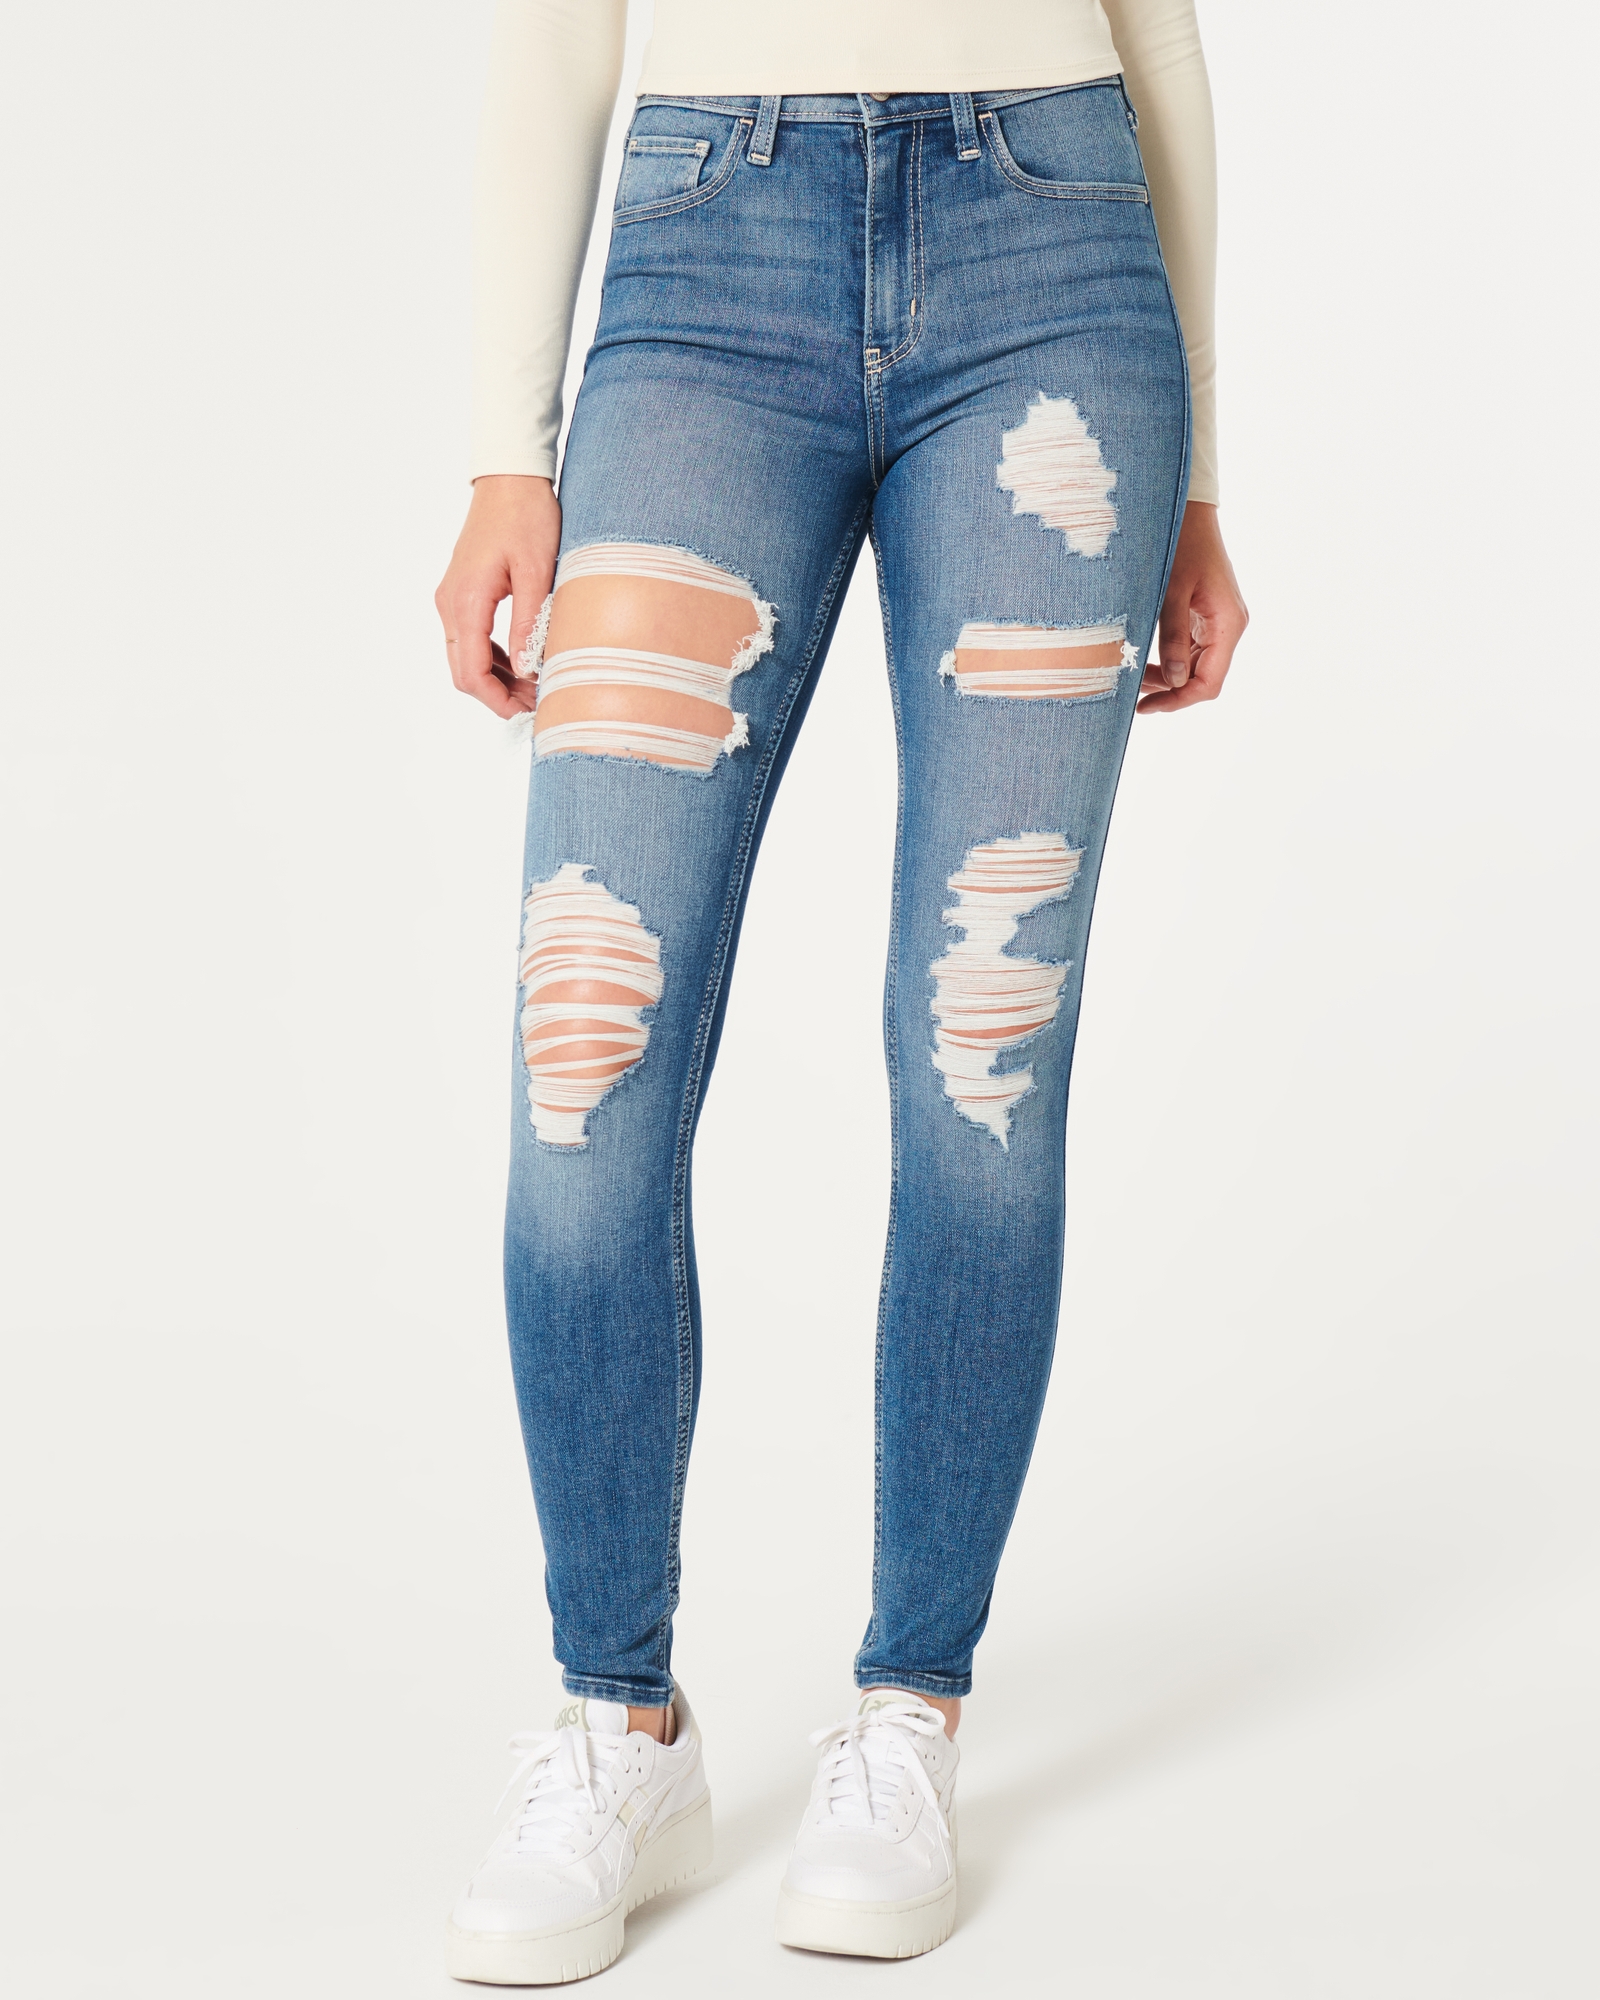 NWOT Hollister High-Rise Super Skinny Ripped